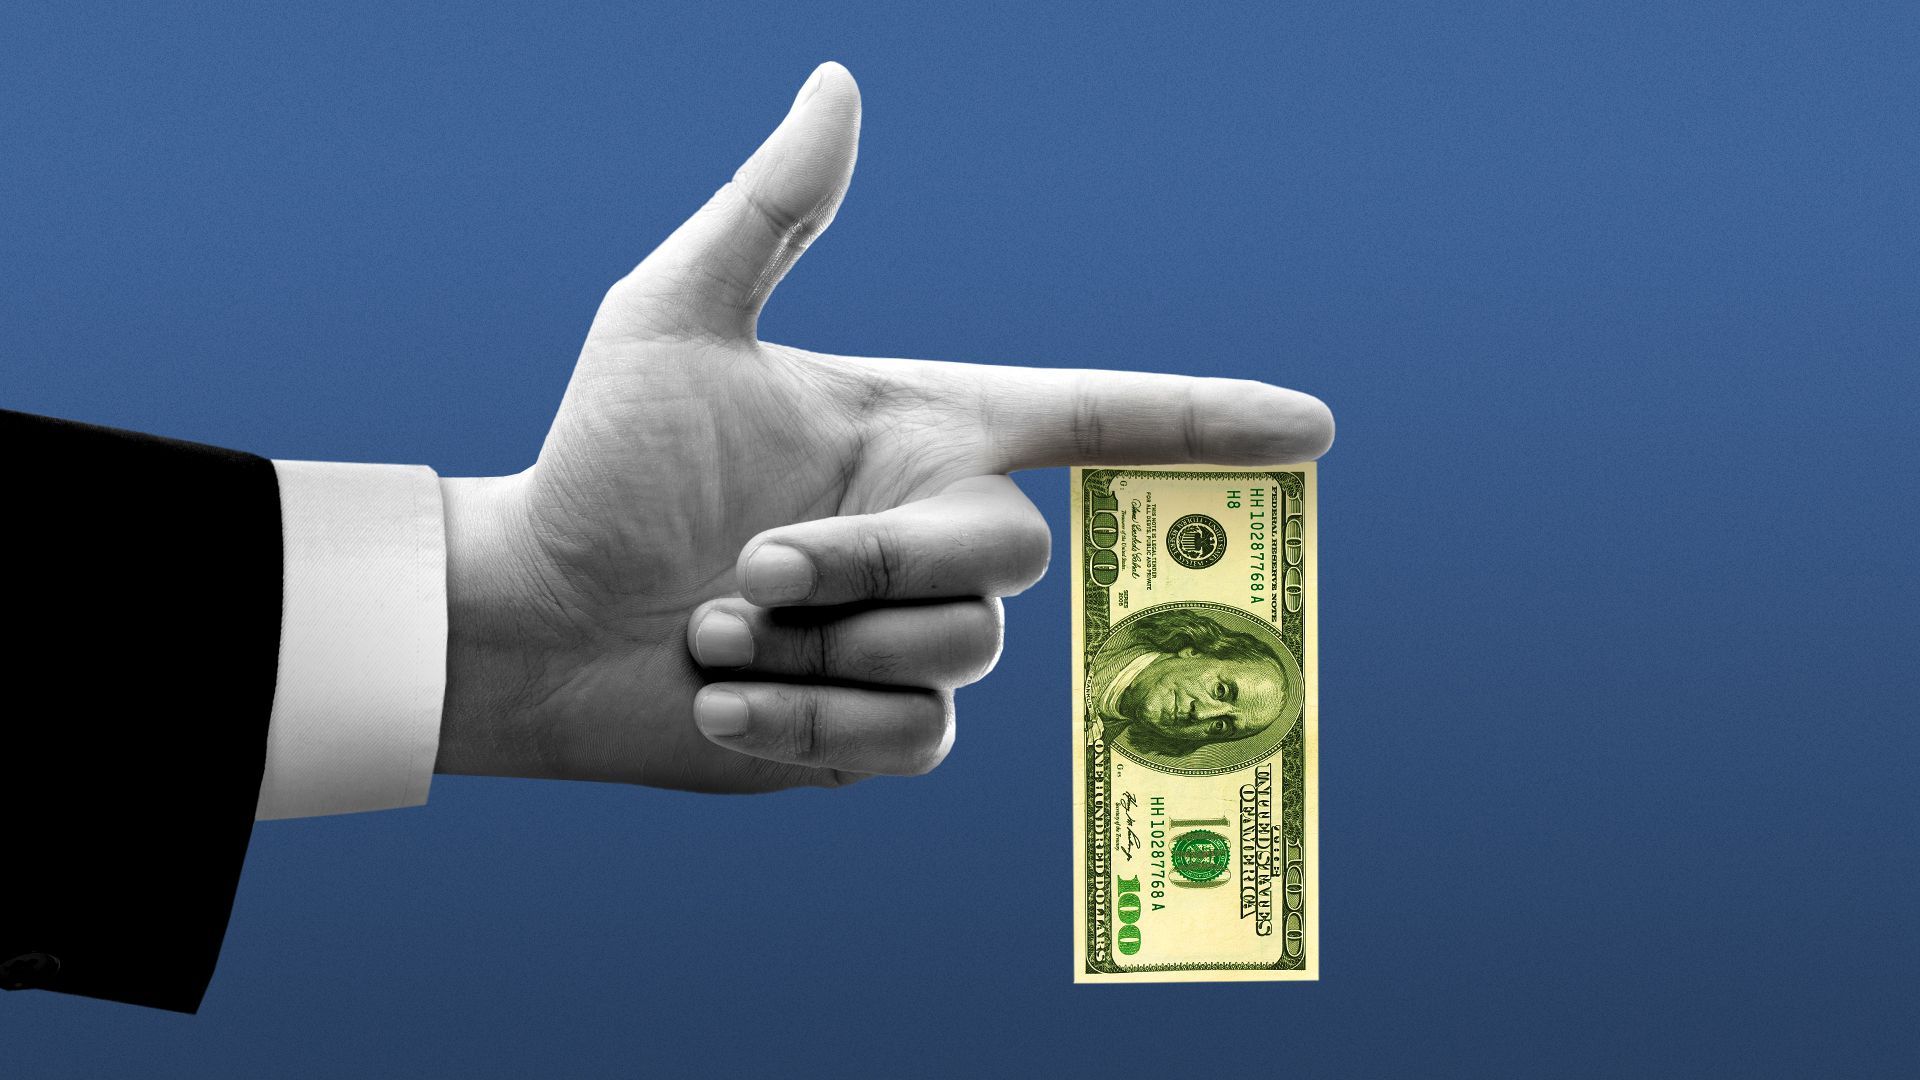 Illustration of a suited person's hand pointing a finger gun with a one hundred dollar bill dropping from their finger